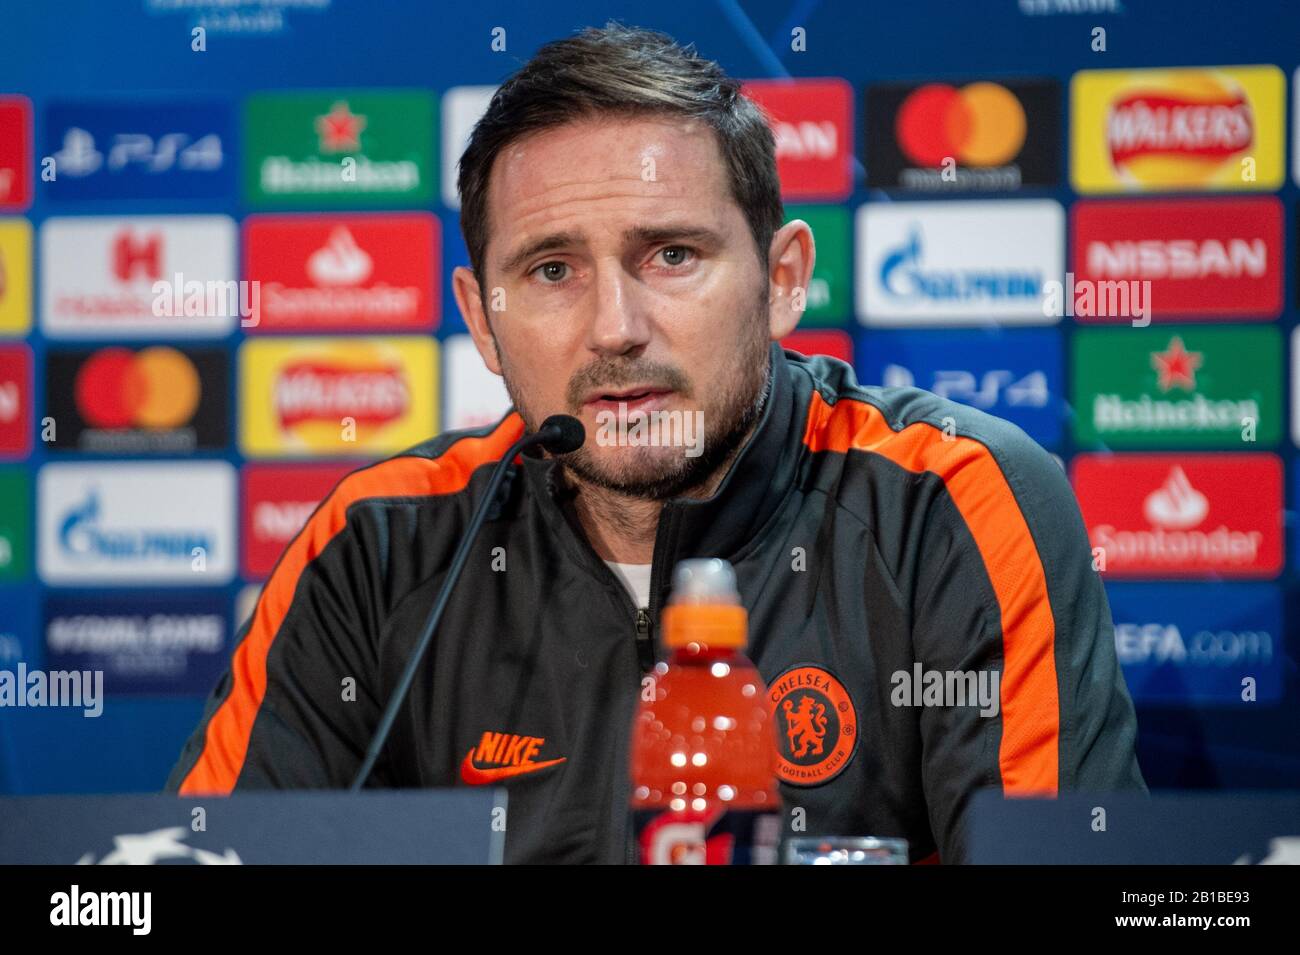 London, United Kingdom. 24 February 2020. Manager Frank Lampard speaks at a Chelsea FC pre-match press conference at Stamford Bridge ahead of their UEFA Champions League match against FC Bayern Munich on Wednesday 25th February 2020. Credit: Peter Manning/Alamy Live News Stock Photo